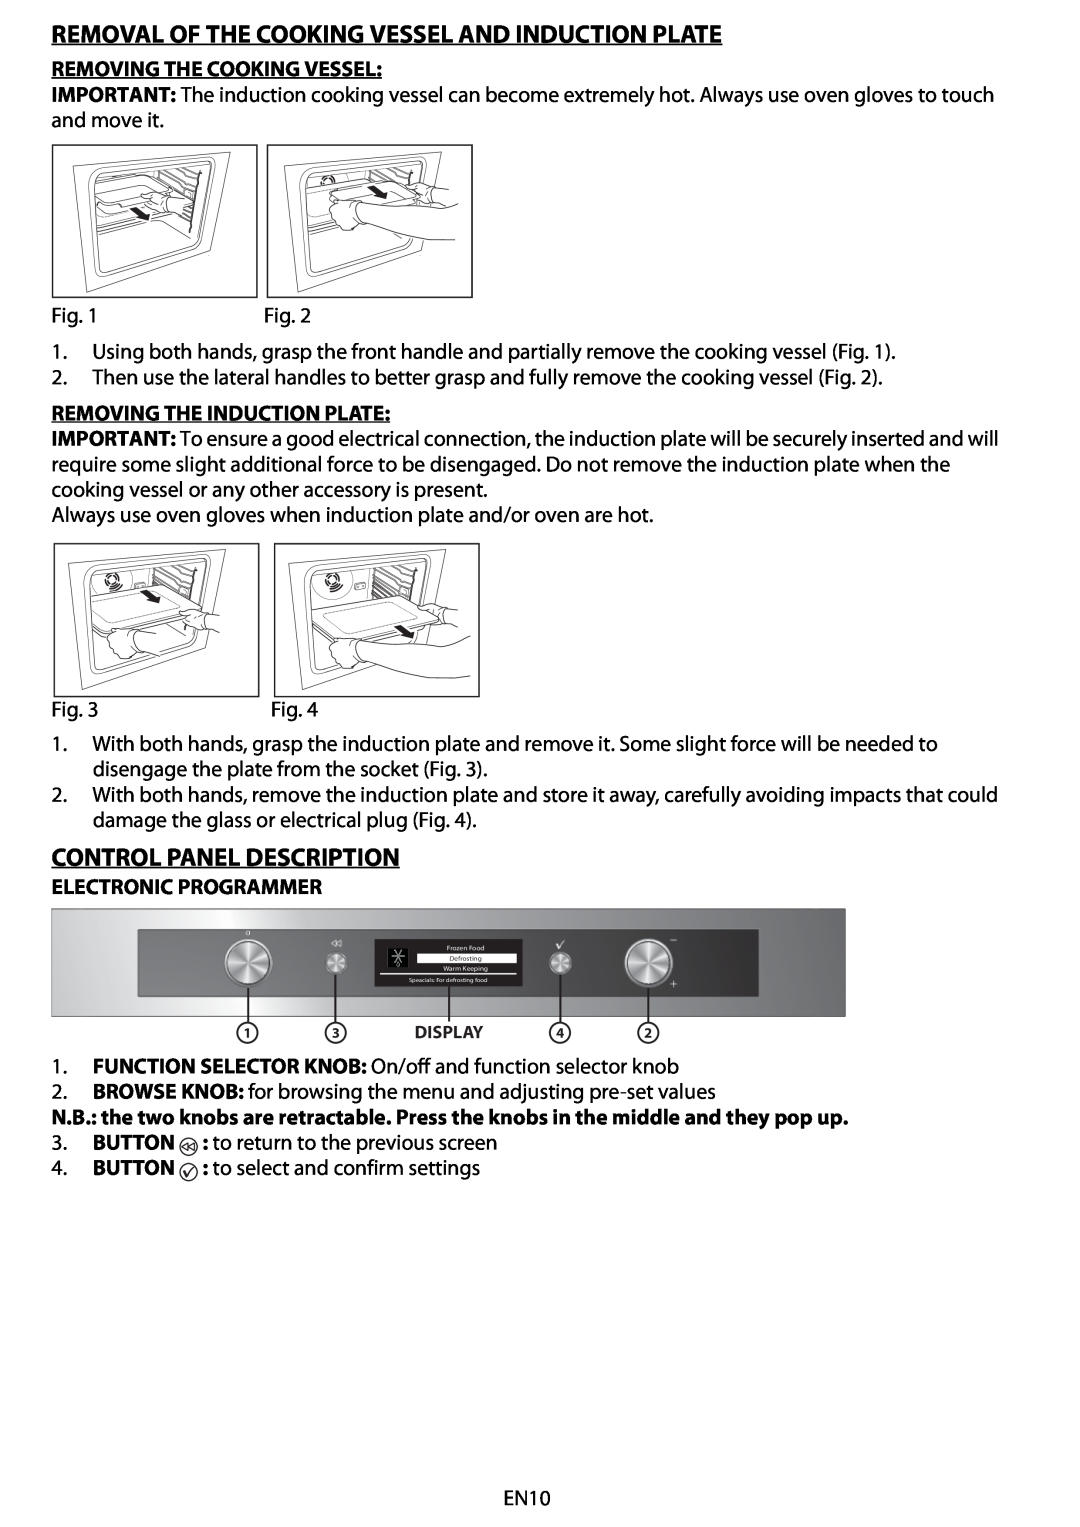 Whirlpool 8790 Removal Of The Cooking Vessel And Induction Plate, Control Panel Description, Removing The Cooking Vessel 